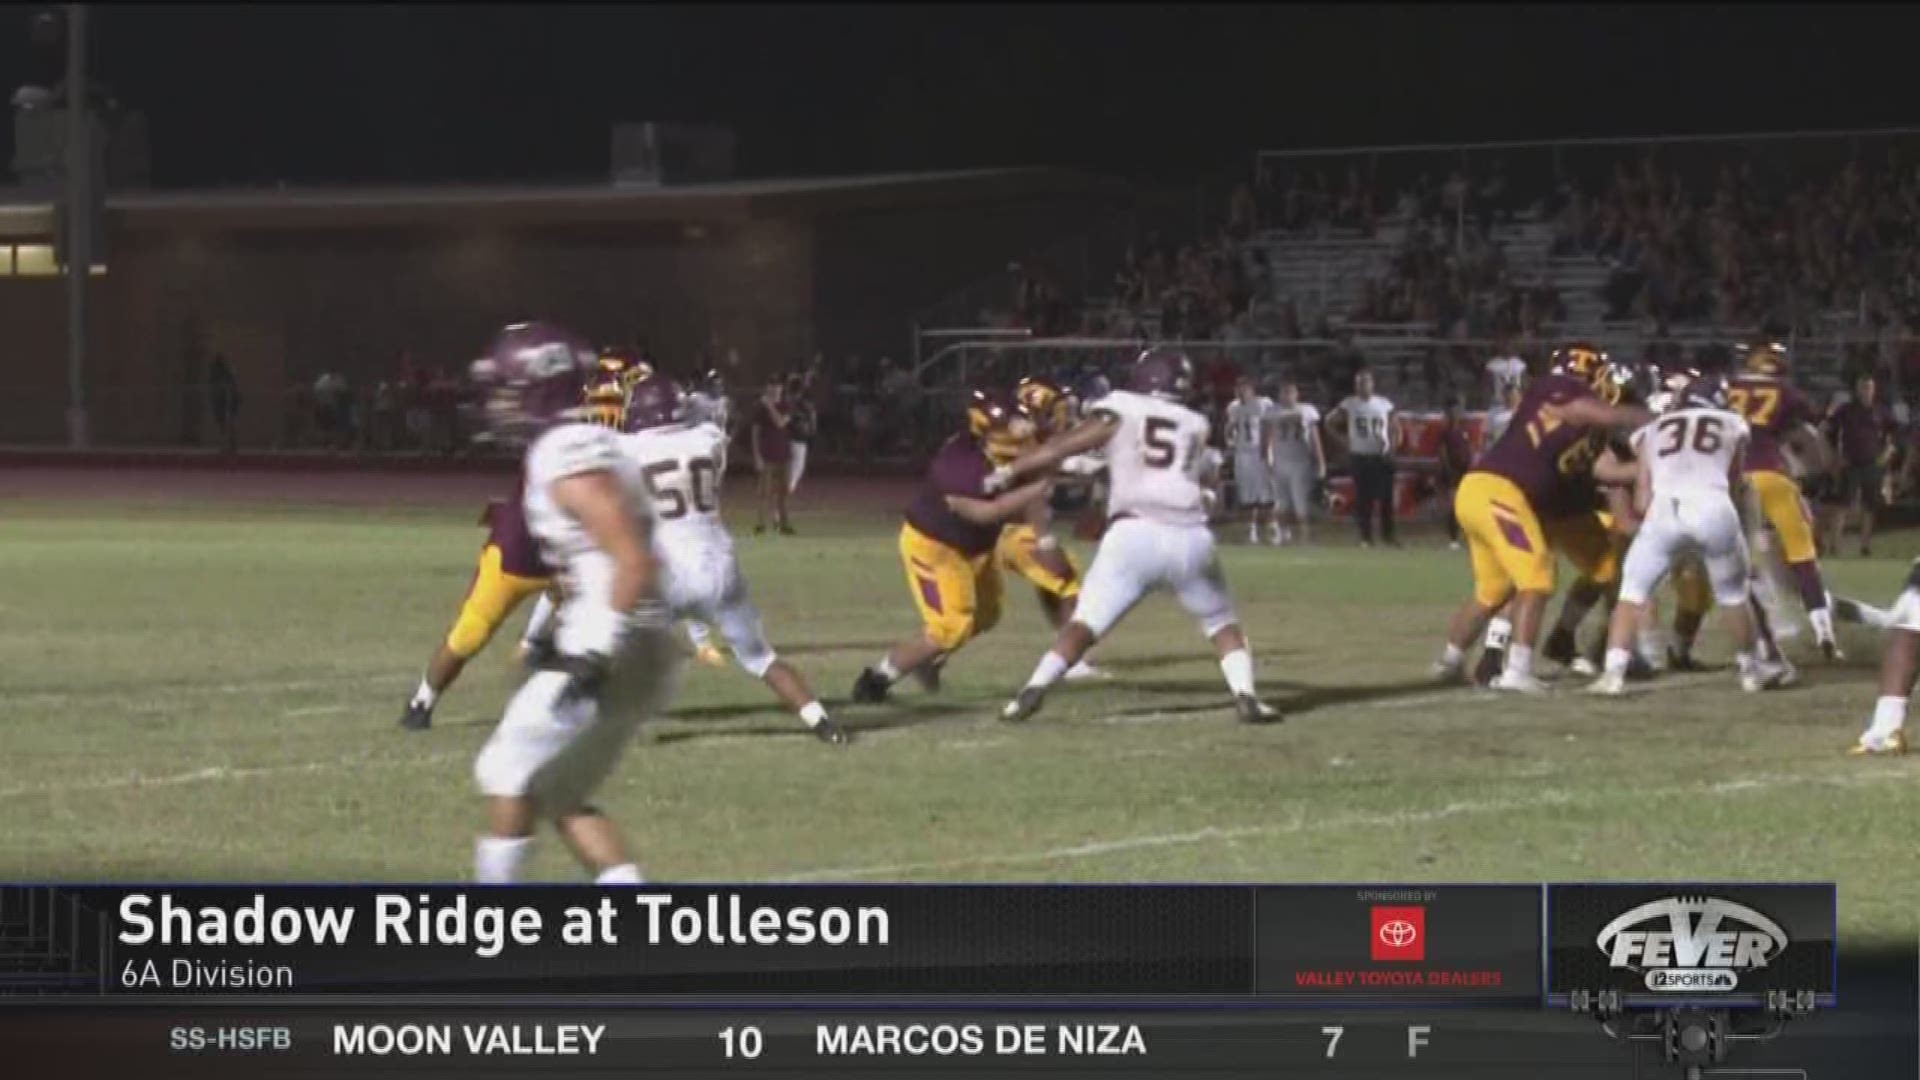 Some slick catches and big drives led Tolleson to a 34-28 win over Shadow Ridge.